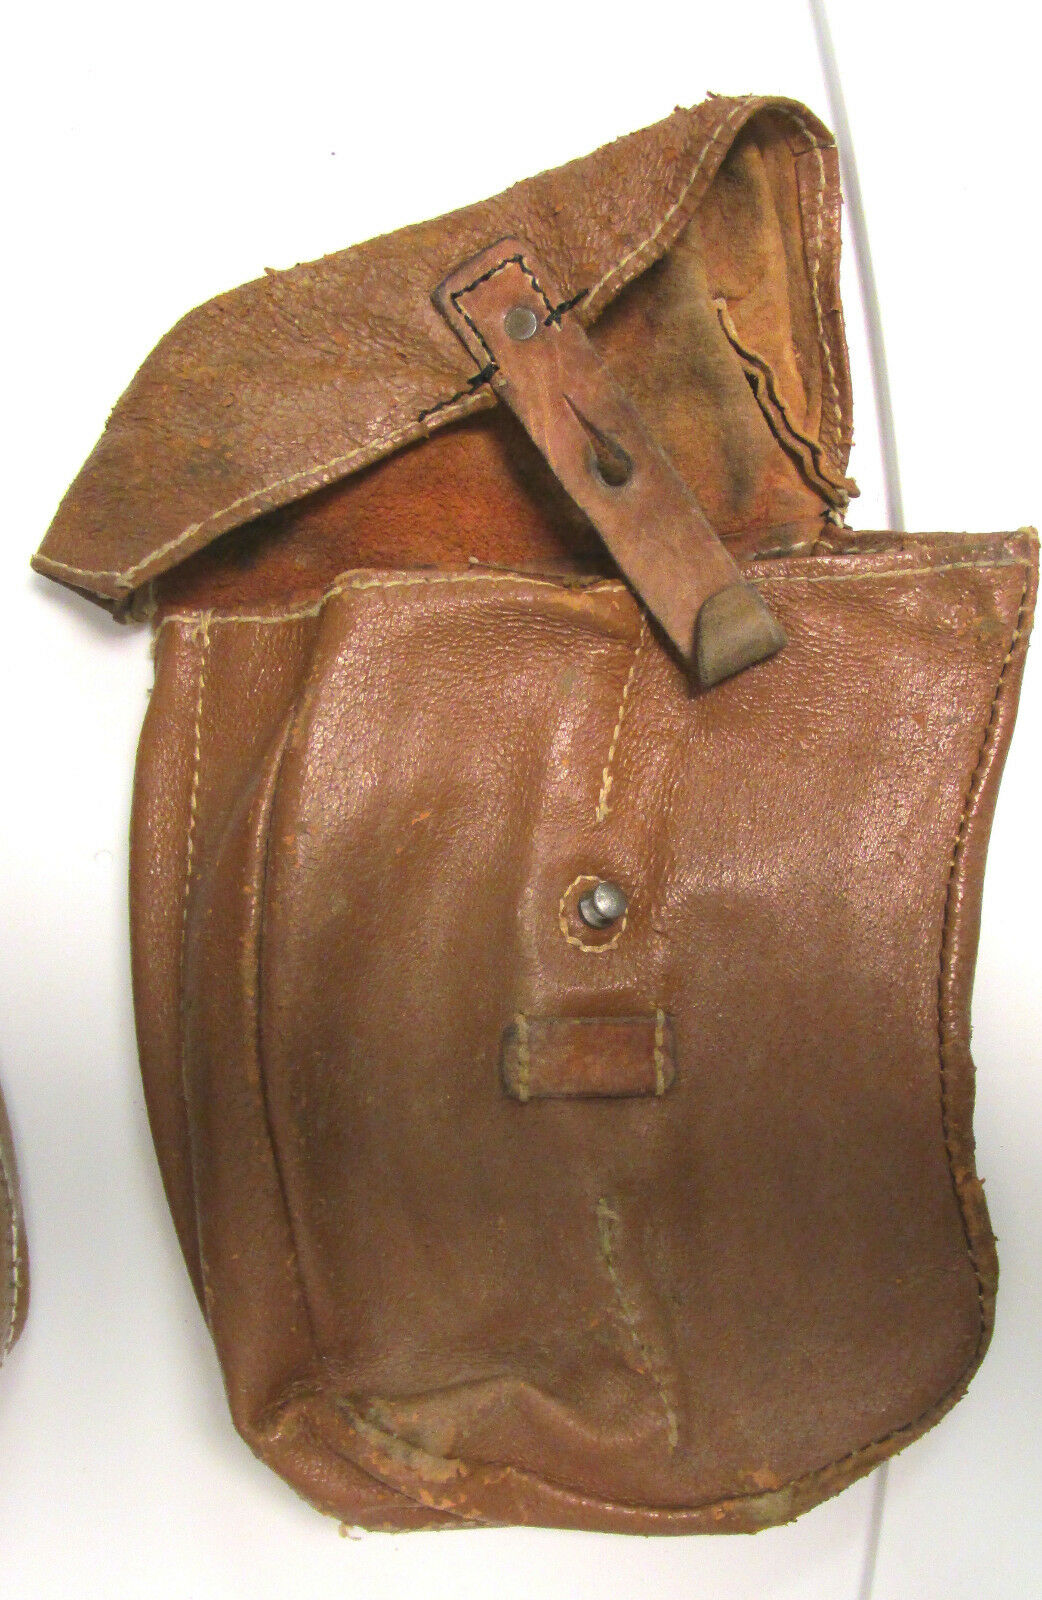 Czech Leather Ammo Pouch for VZ 58 - Used European Military Surplus